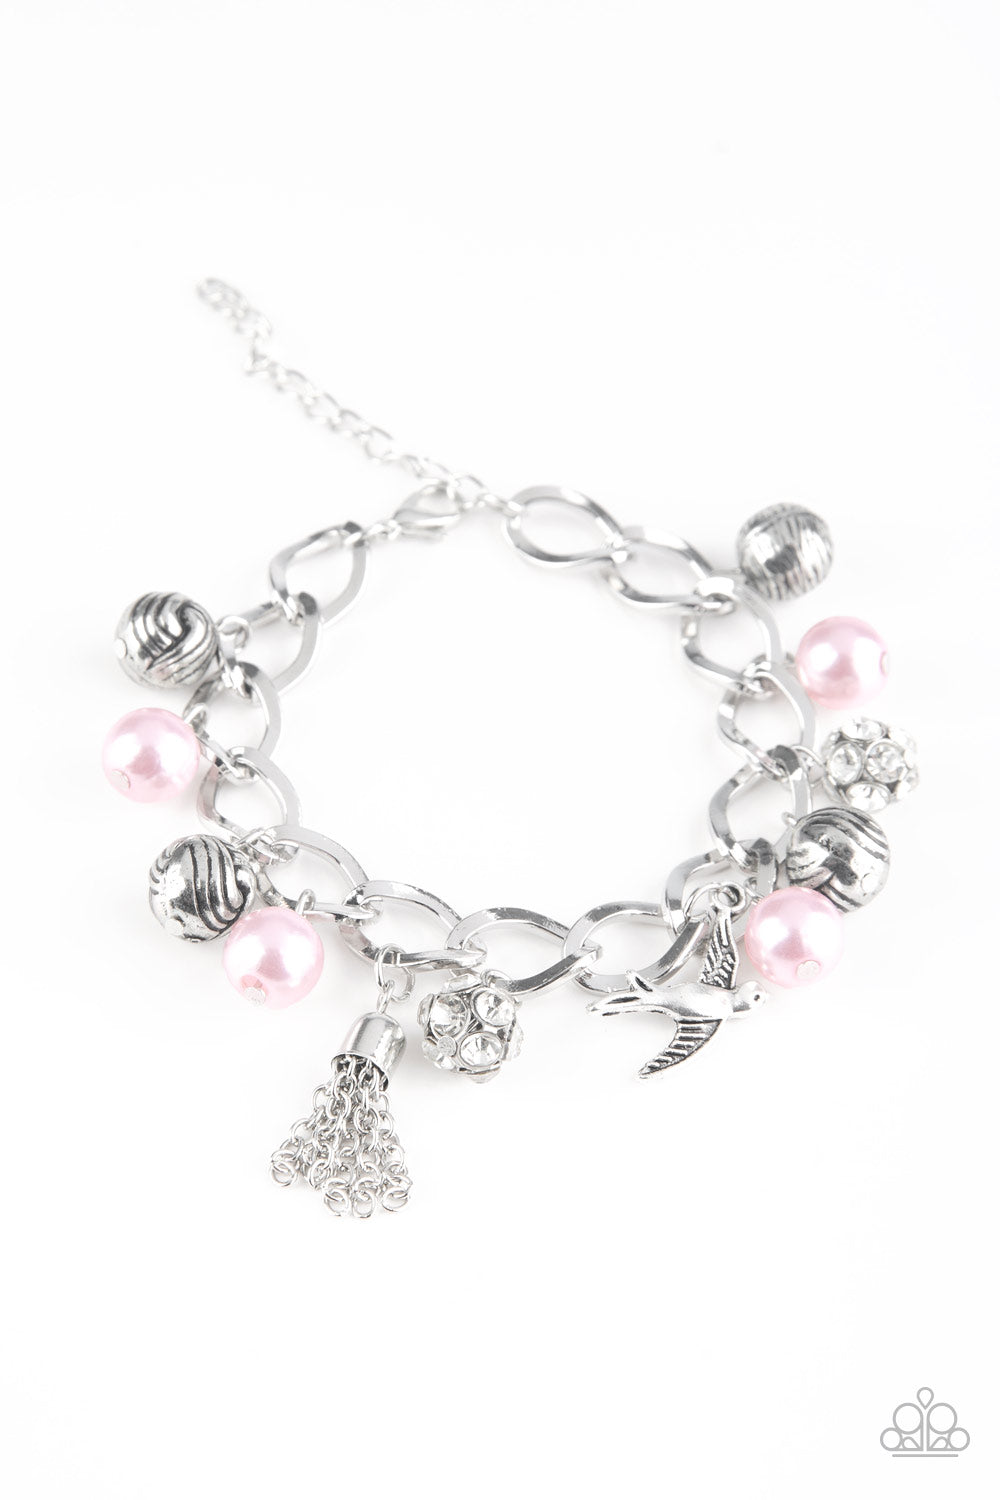 Pink pearls, ornate silver beads, and white rhinestone encrusted accents swing from a dramatic silver chain. A shimmery silver bird charm and silver tassel are added to the display, creating a whimsical fringe around the wrist. Features an adjustable clasp closure.